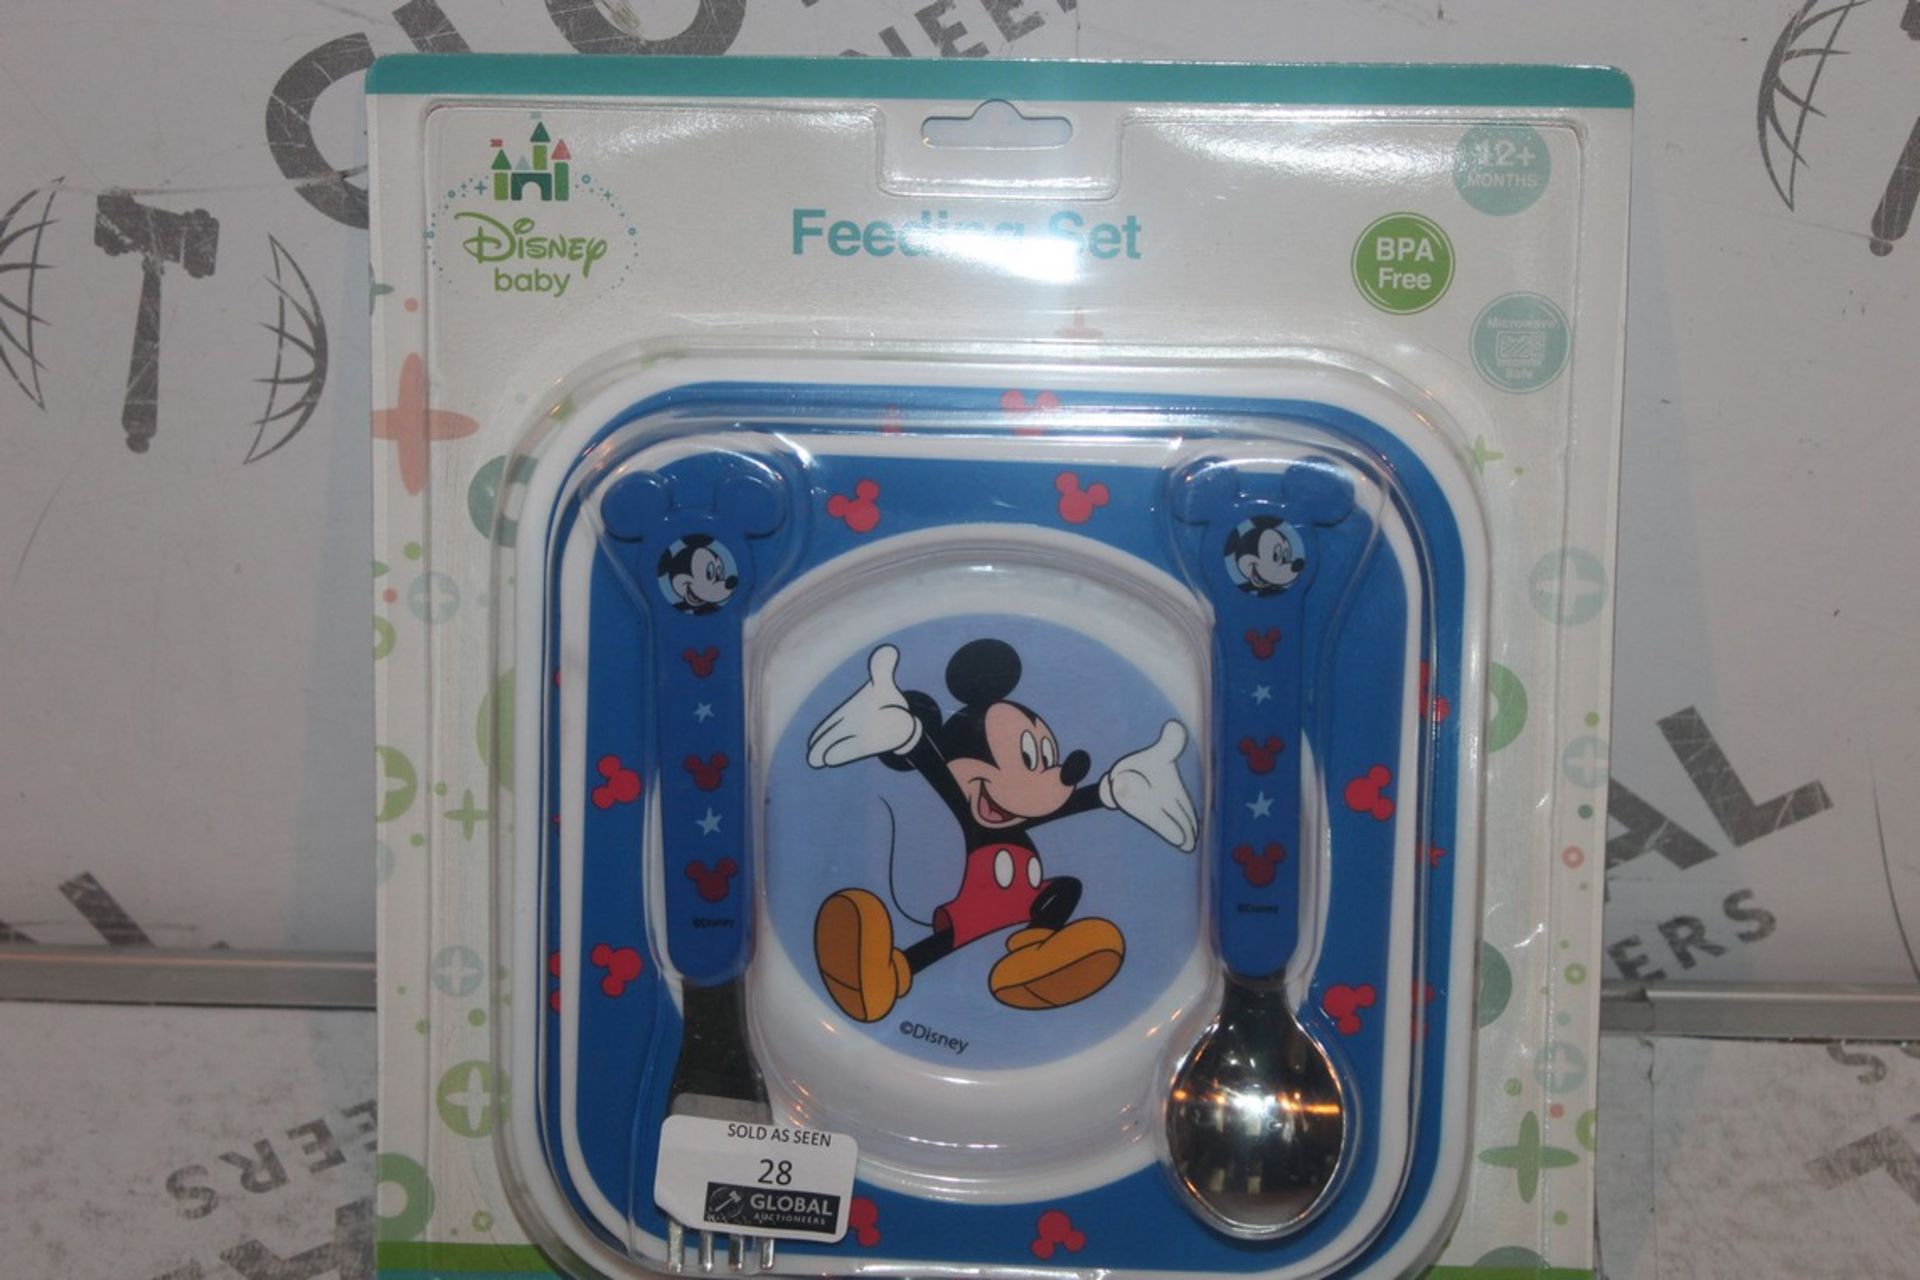 Lot to Contain 6 Brand New Disney Baby Feeding Sets